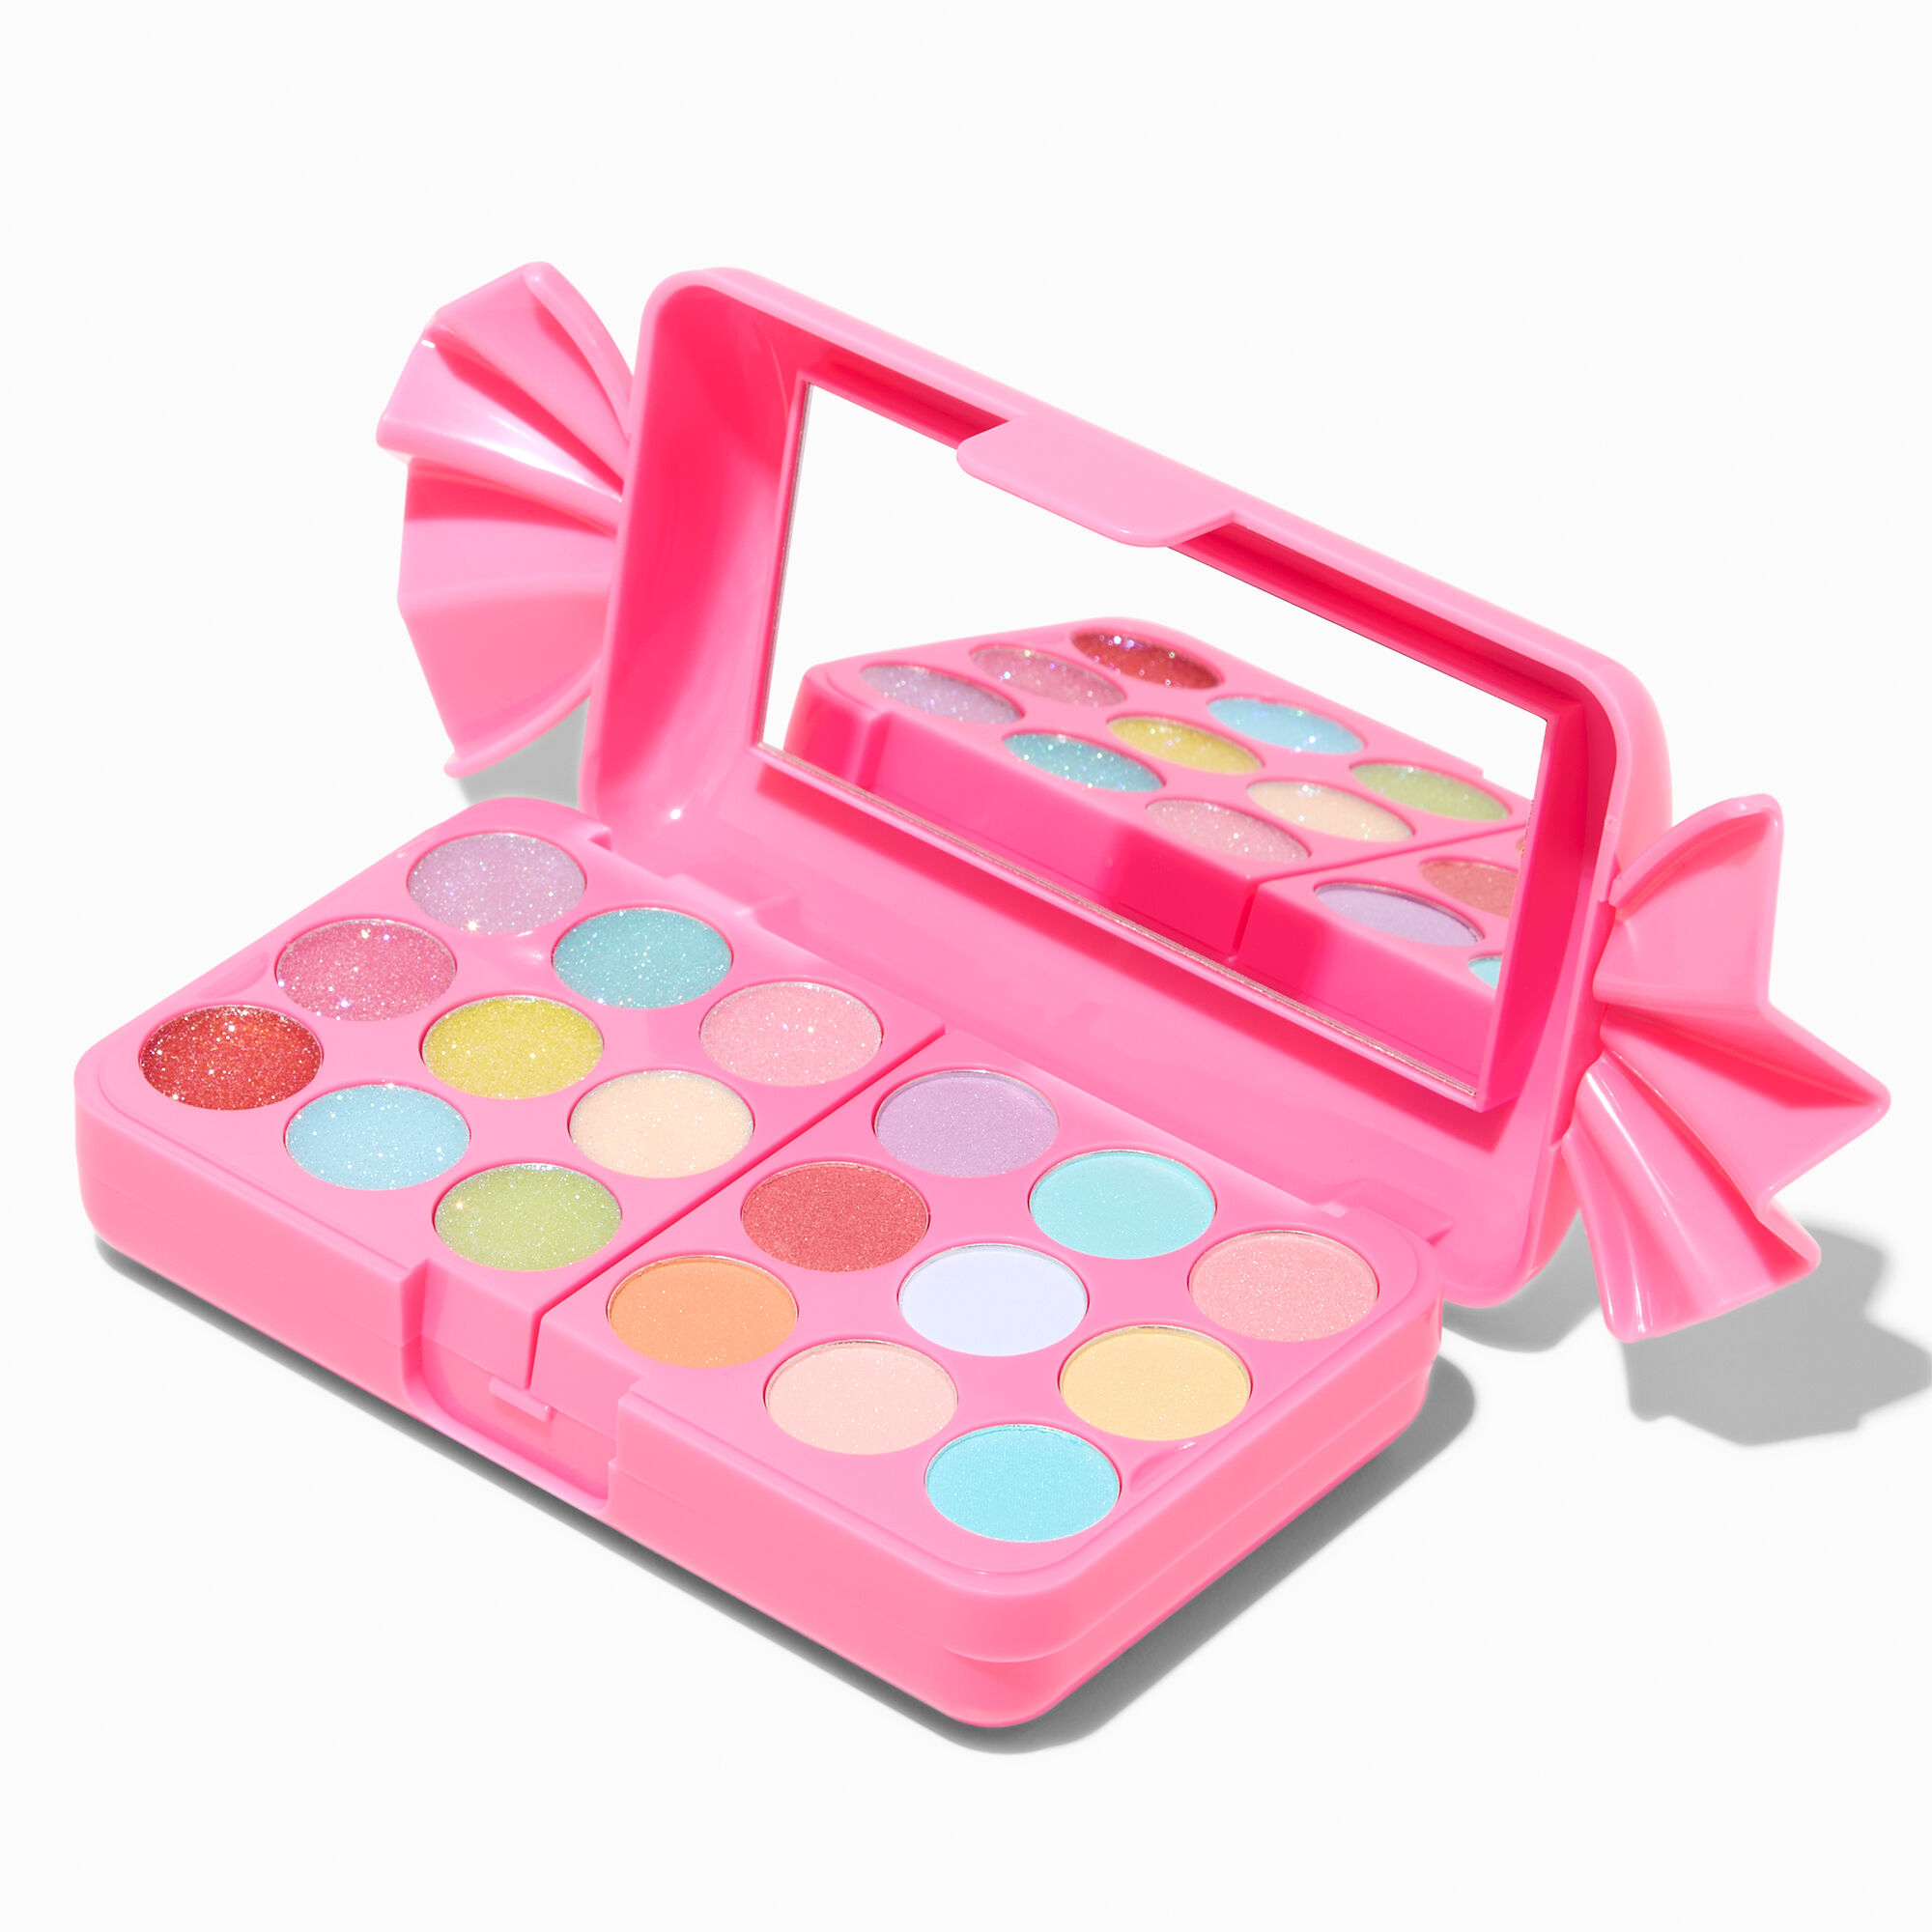 View Claires Candy Wrapper Makeup Set Pink information